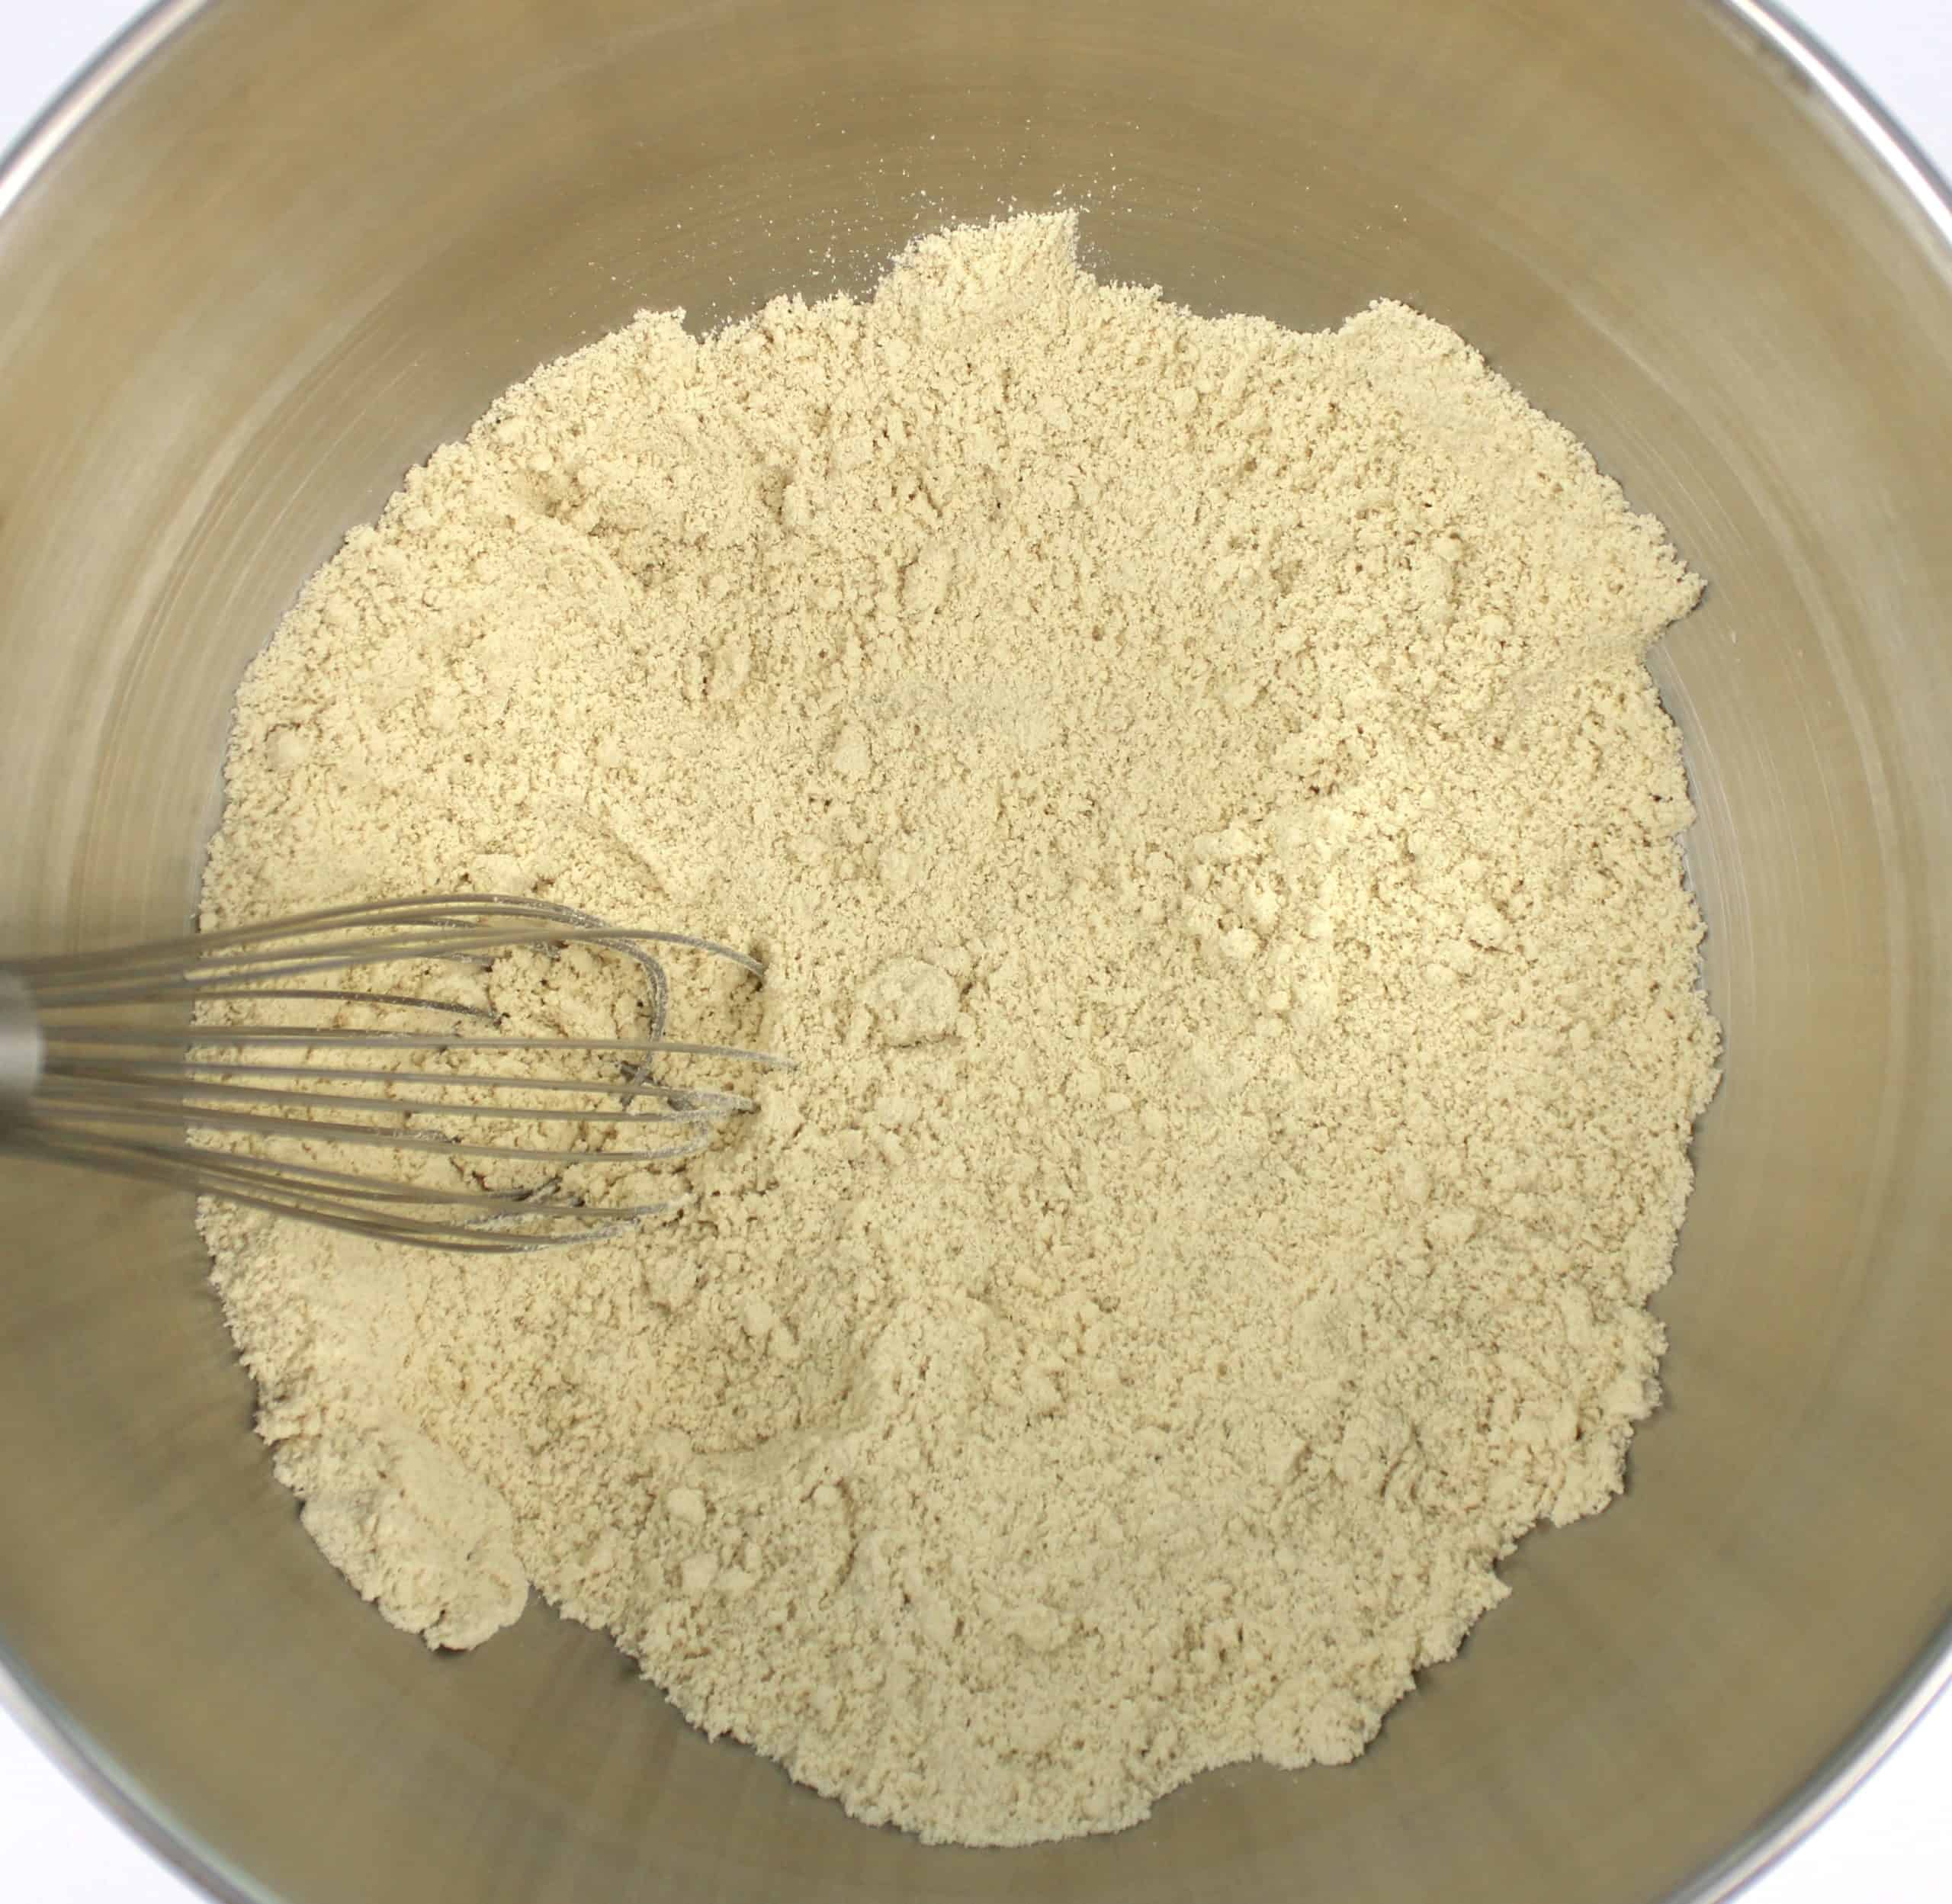 dry ingredients for keto tortillas in stand mixer bowl with whisk